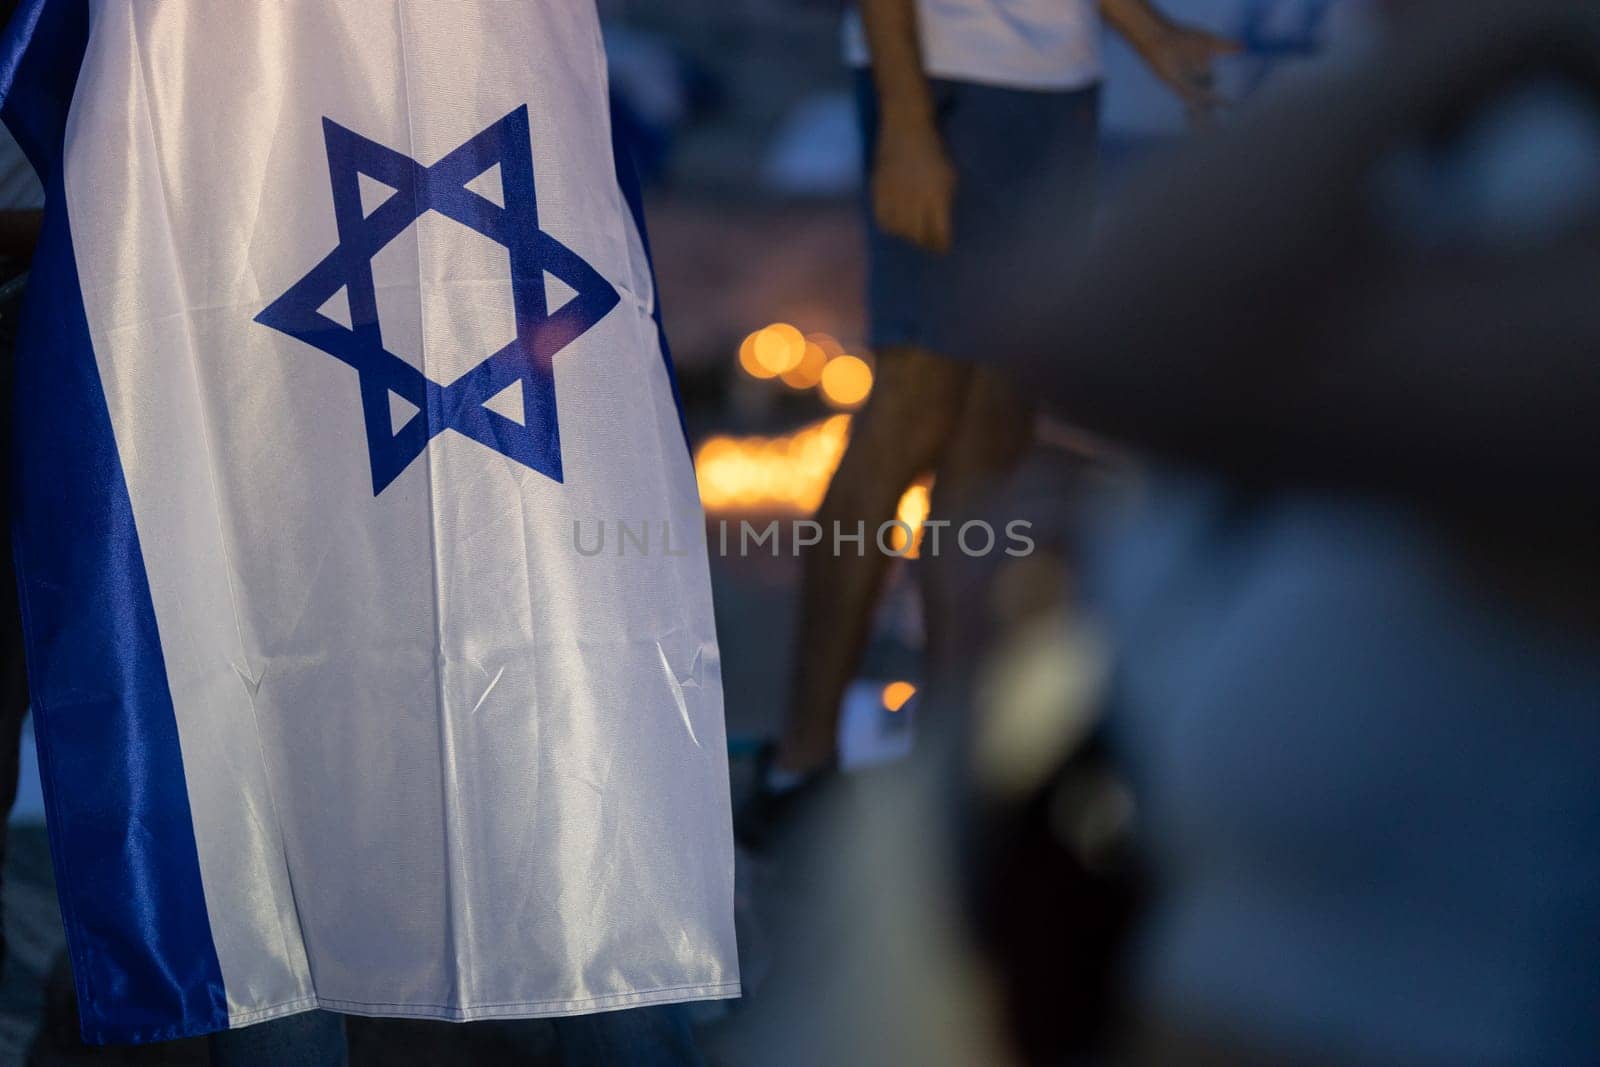 Lisbon, Portugal October 10, 2023. The flag of Israel in close-up on the background of a rally in support of Israel at dusk by Studia72